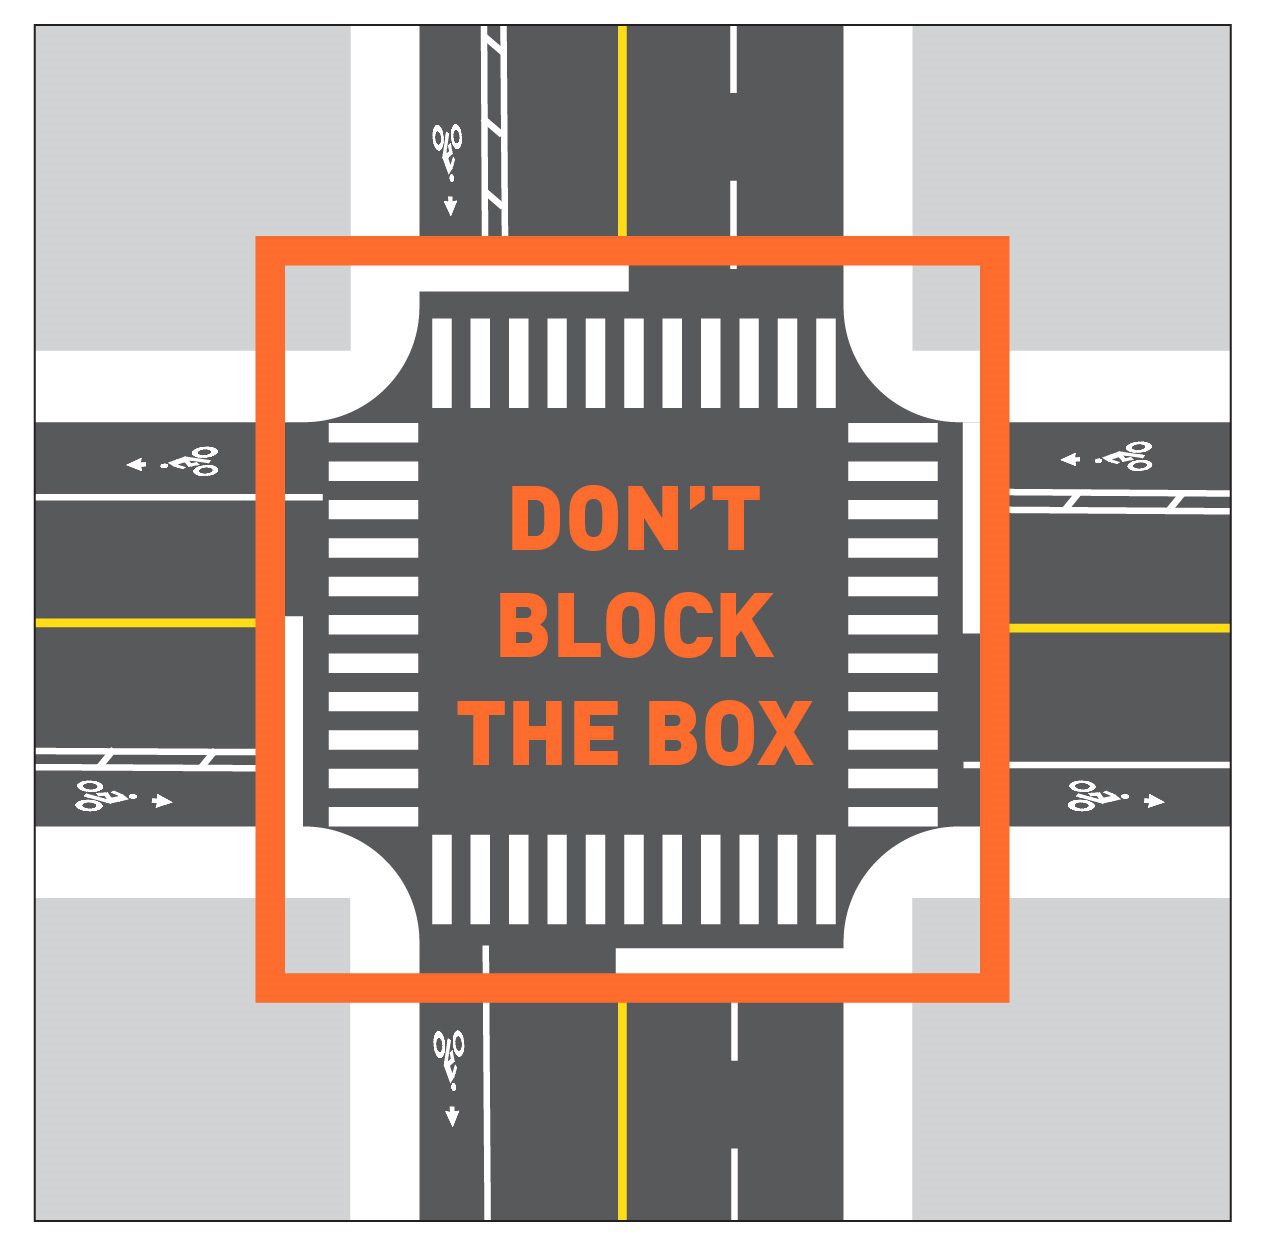 Graphic illustration reminding drivers to keep intersections and crosswalks clear by not entering the intersection when there's not a clear path across. The graphic shows an intersection and has an orange box around the intersection.